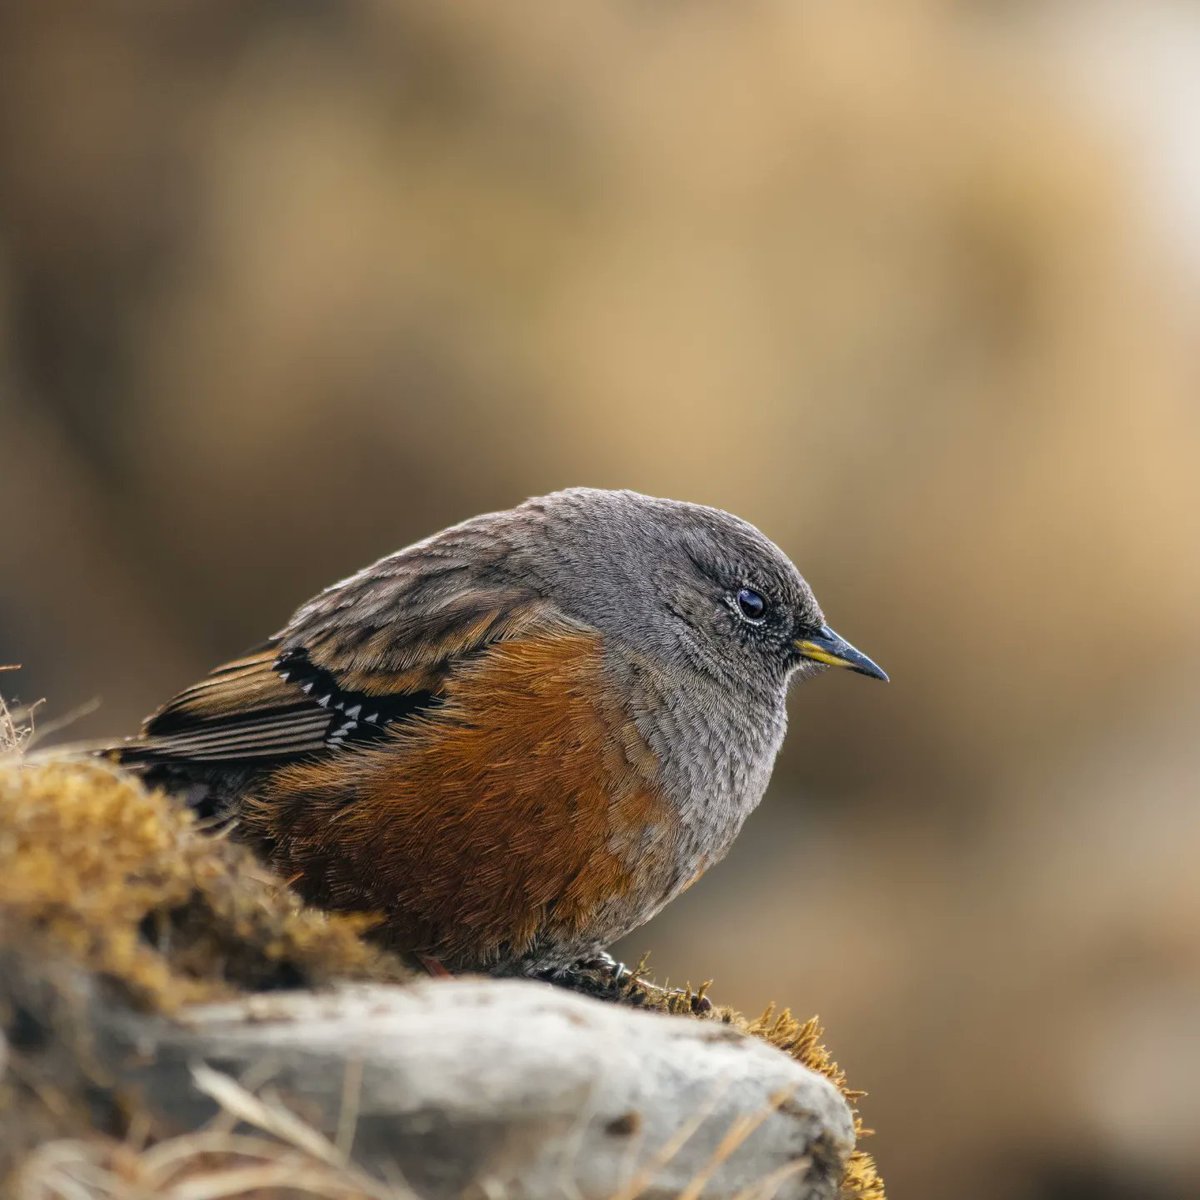 Take some rest little fella, its tiring to fly above most of us can't even imagine.

In pic :Alpine accentor

#IndiAves #Alipinebird #chandrashilapeak #uttrakhand #indianwildlife #wildlifephotography #birdphotography #birdsofindia #birdsofinstagram  #shotoftheday